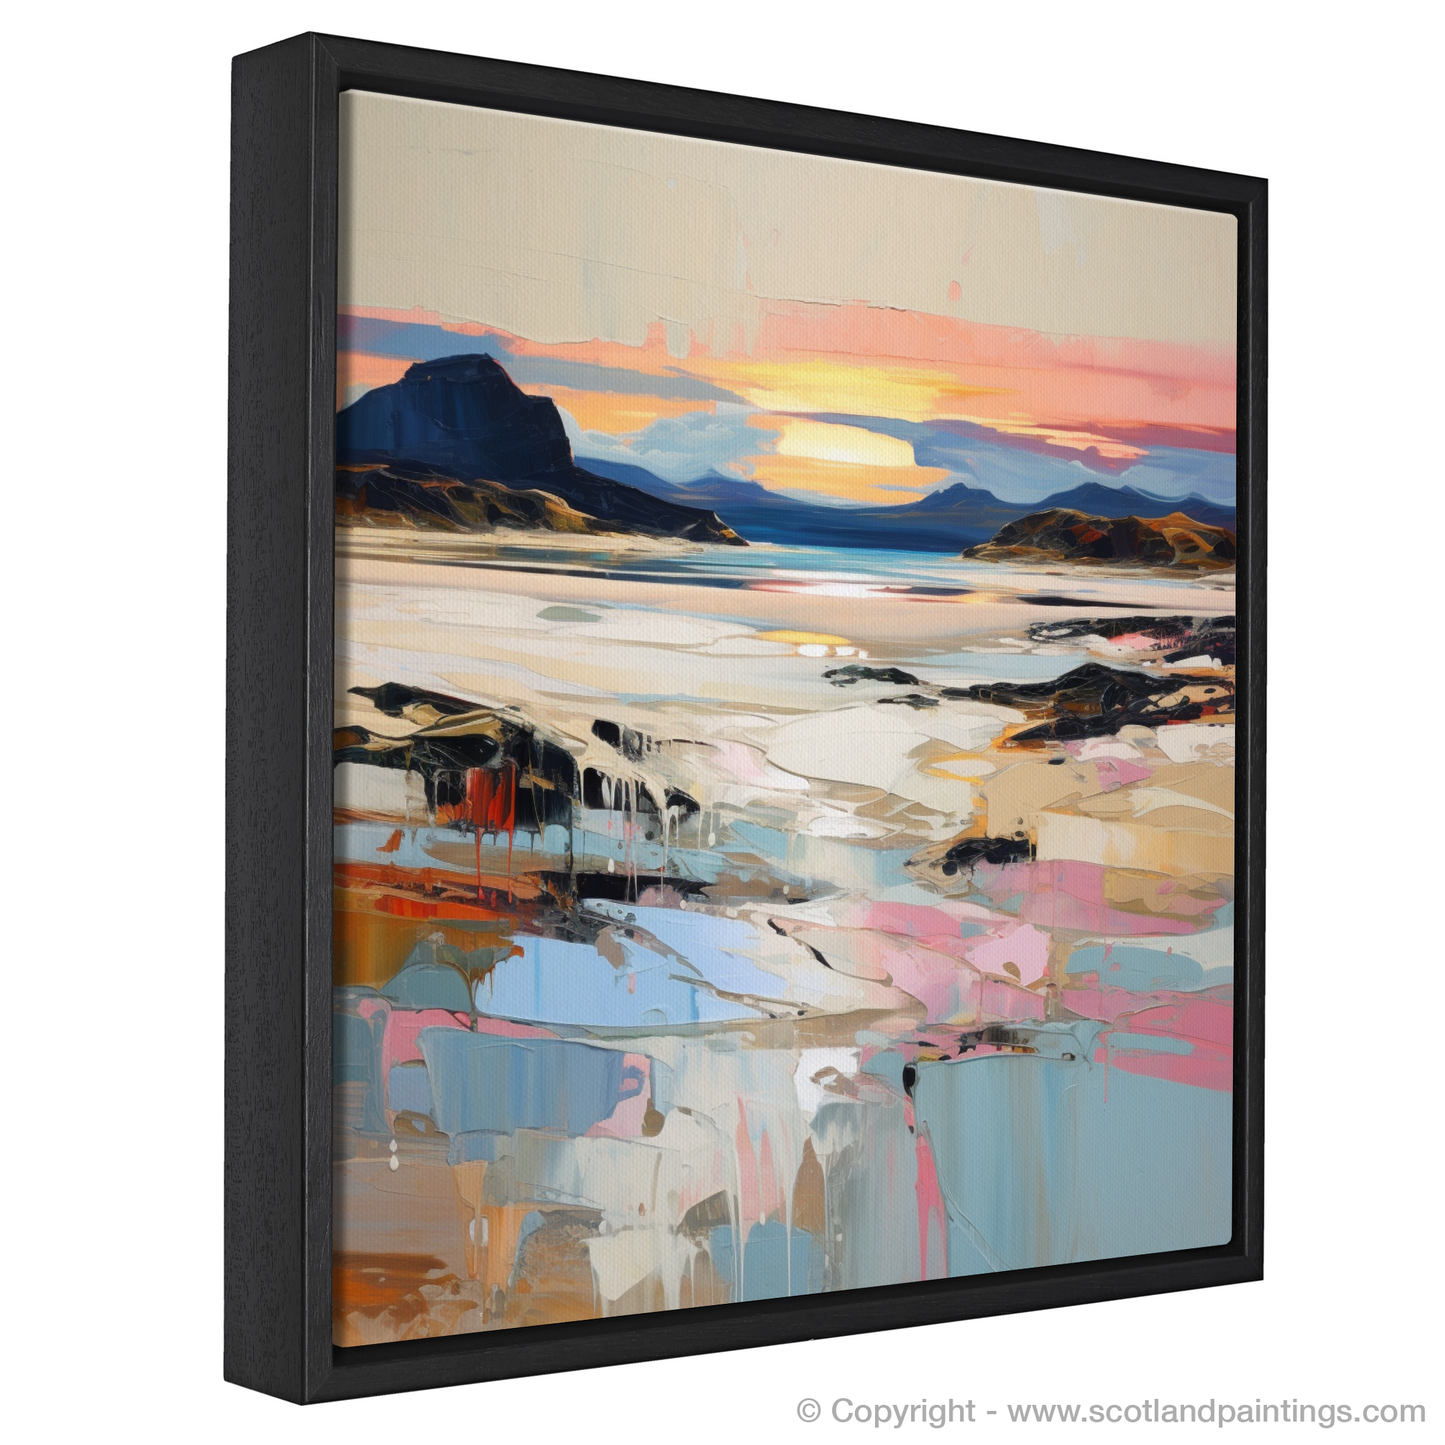 Painting and Art Print of Mellon Udrigle Beach at dusk entitled "Dusk at Mellon Udrigle: An Expressionist Ode to Scottish Coves".